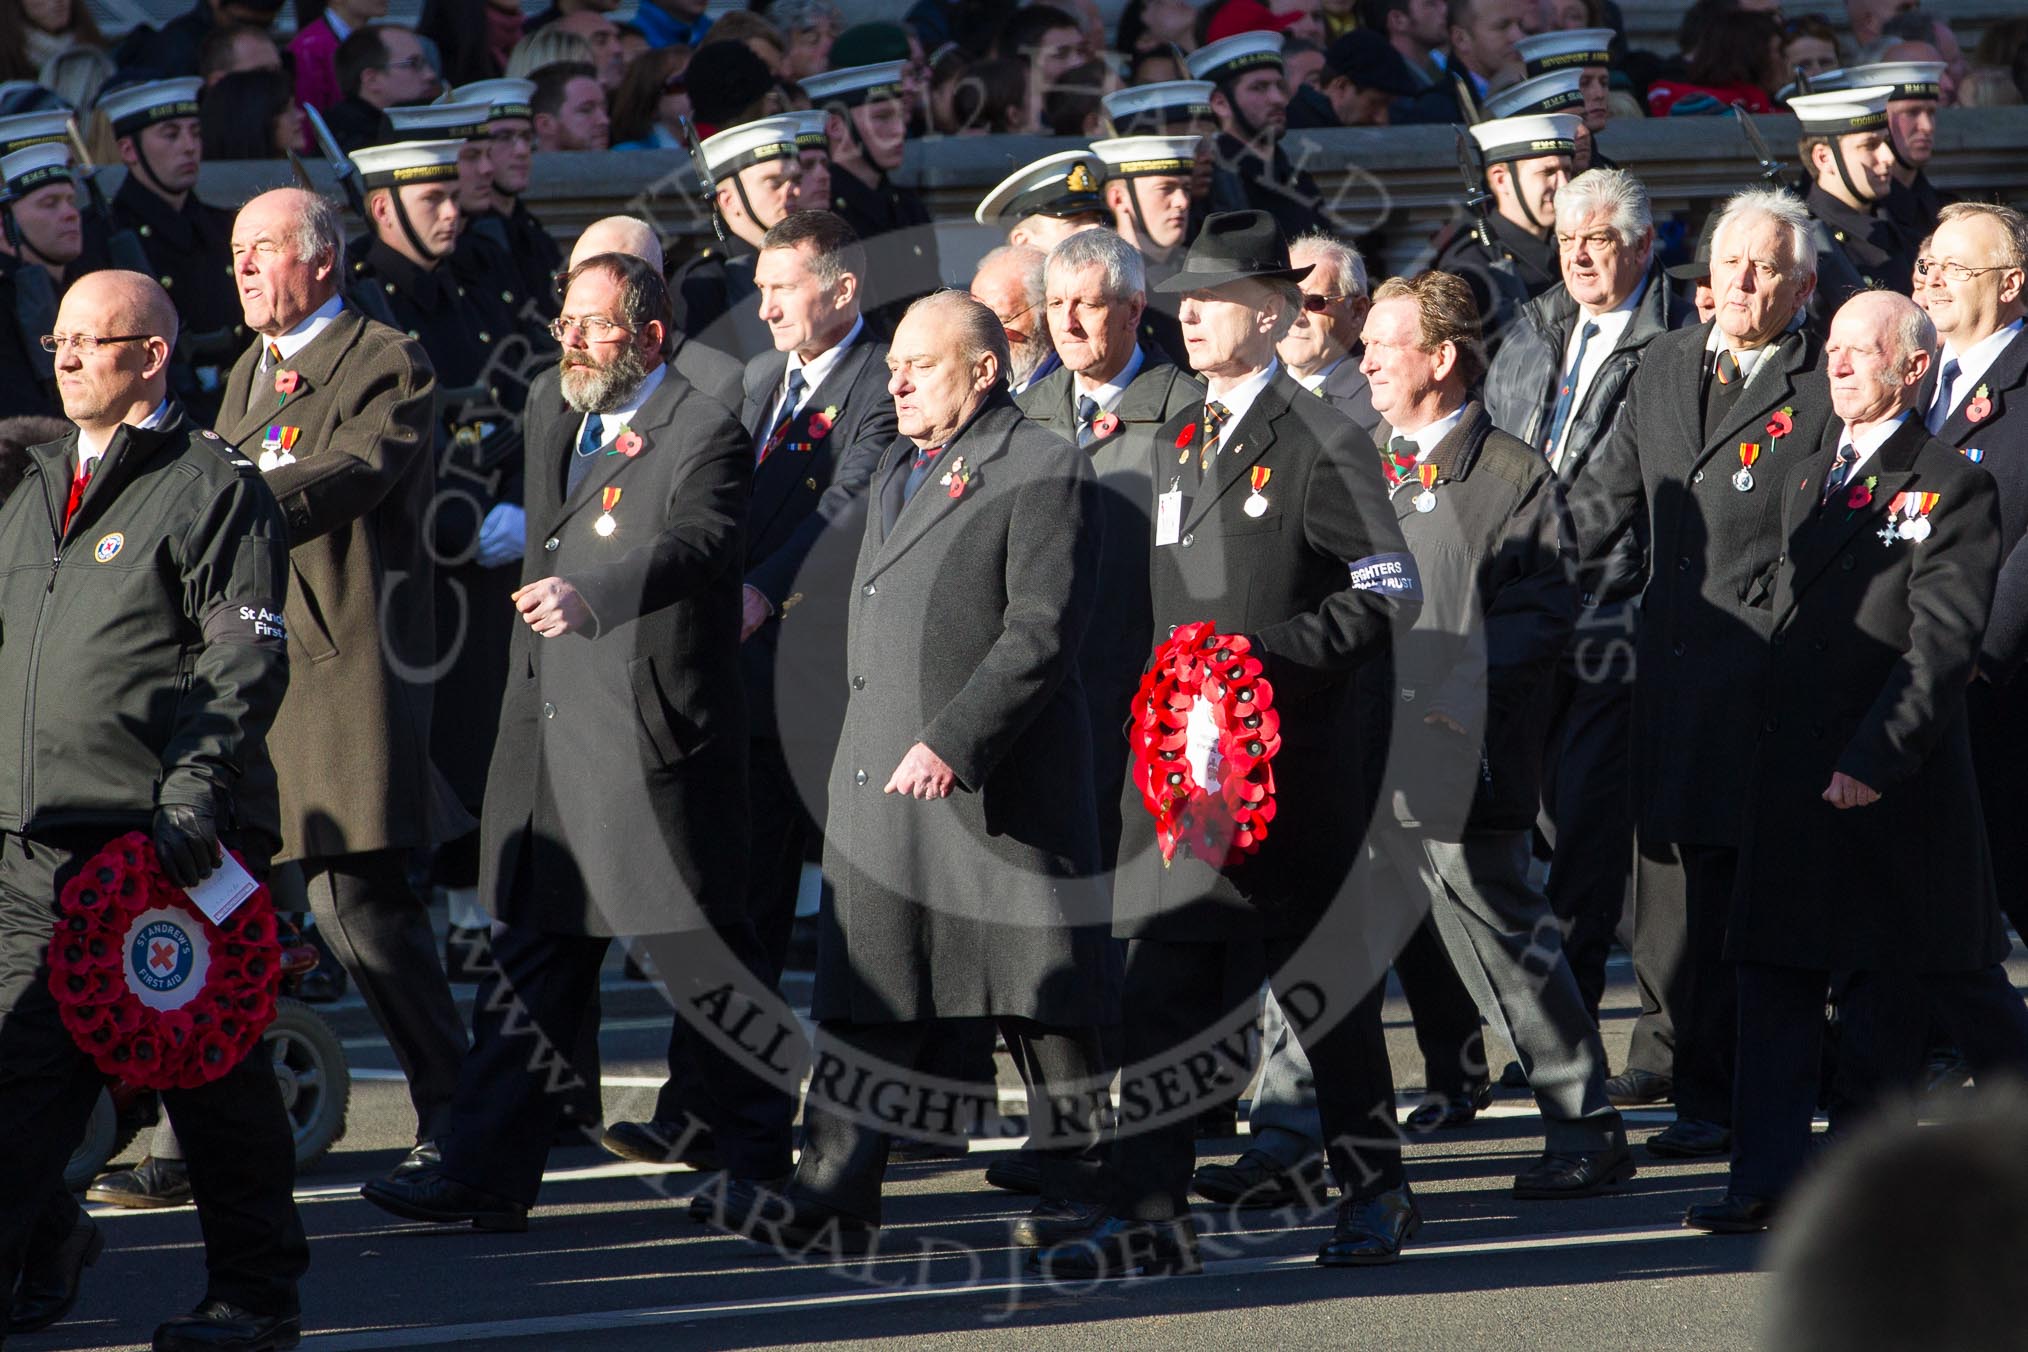 Remembrance Sunday 2012 Cenotaph March Past: Group M17 - St Andrew's Ambulance Association, and M18 - Firefighters Memorial Charitable Trust..
Whitehall, Cenotaph,
London SW1,

United Kingdom,
on 11 November 2012 at 12:11, image #1541